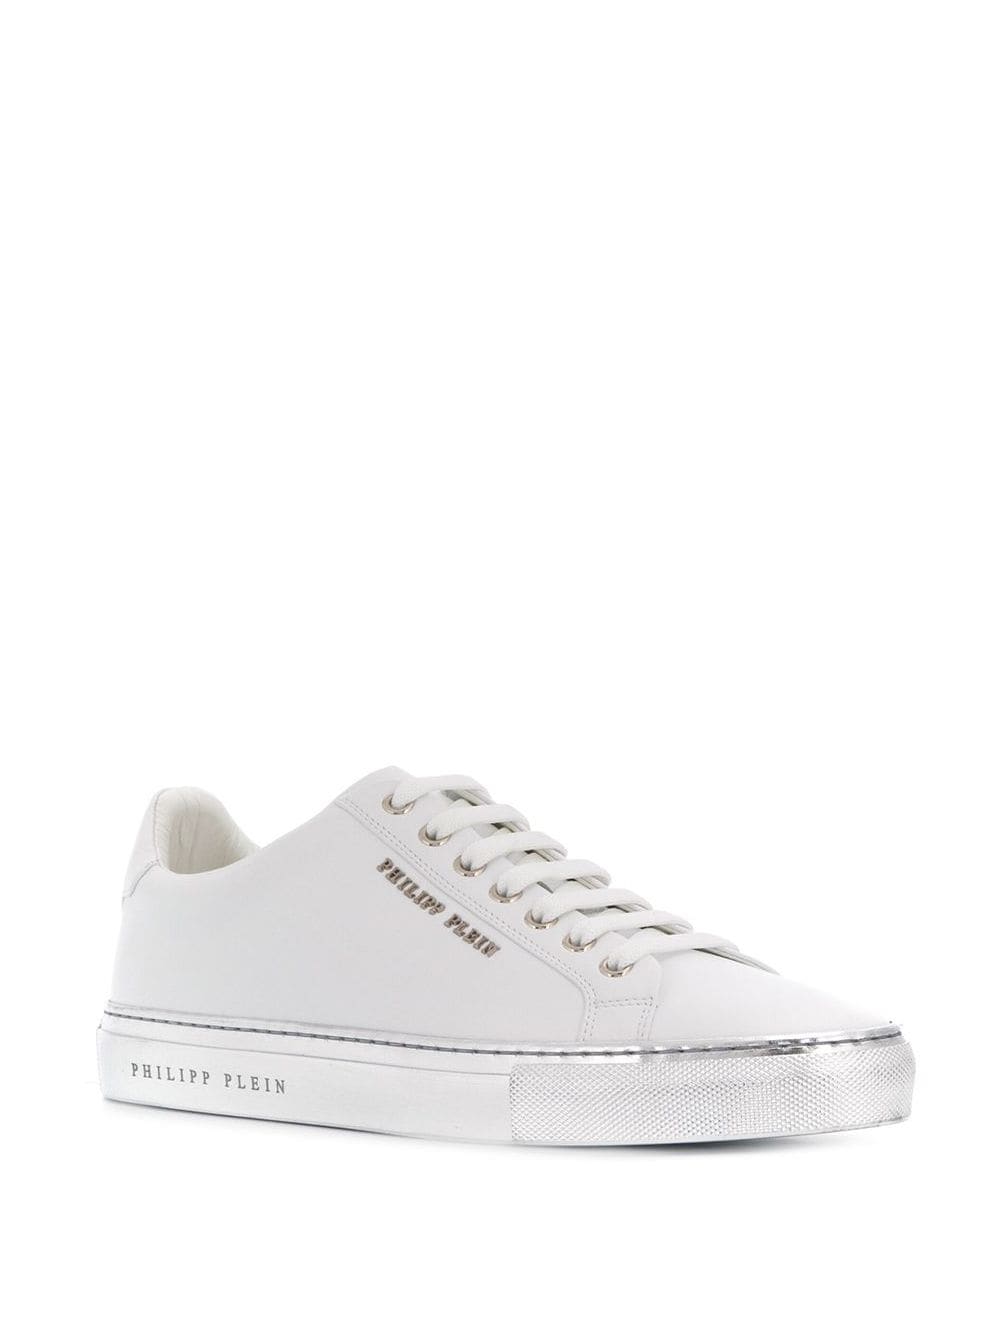 Shop white Philipp Plein low-top sneakers with Express Delivery - Farfetch